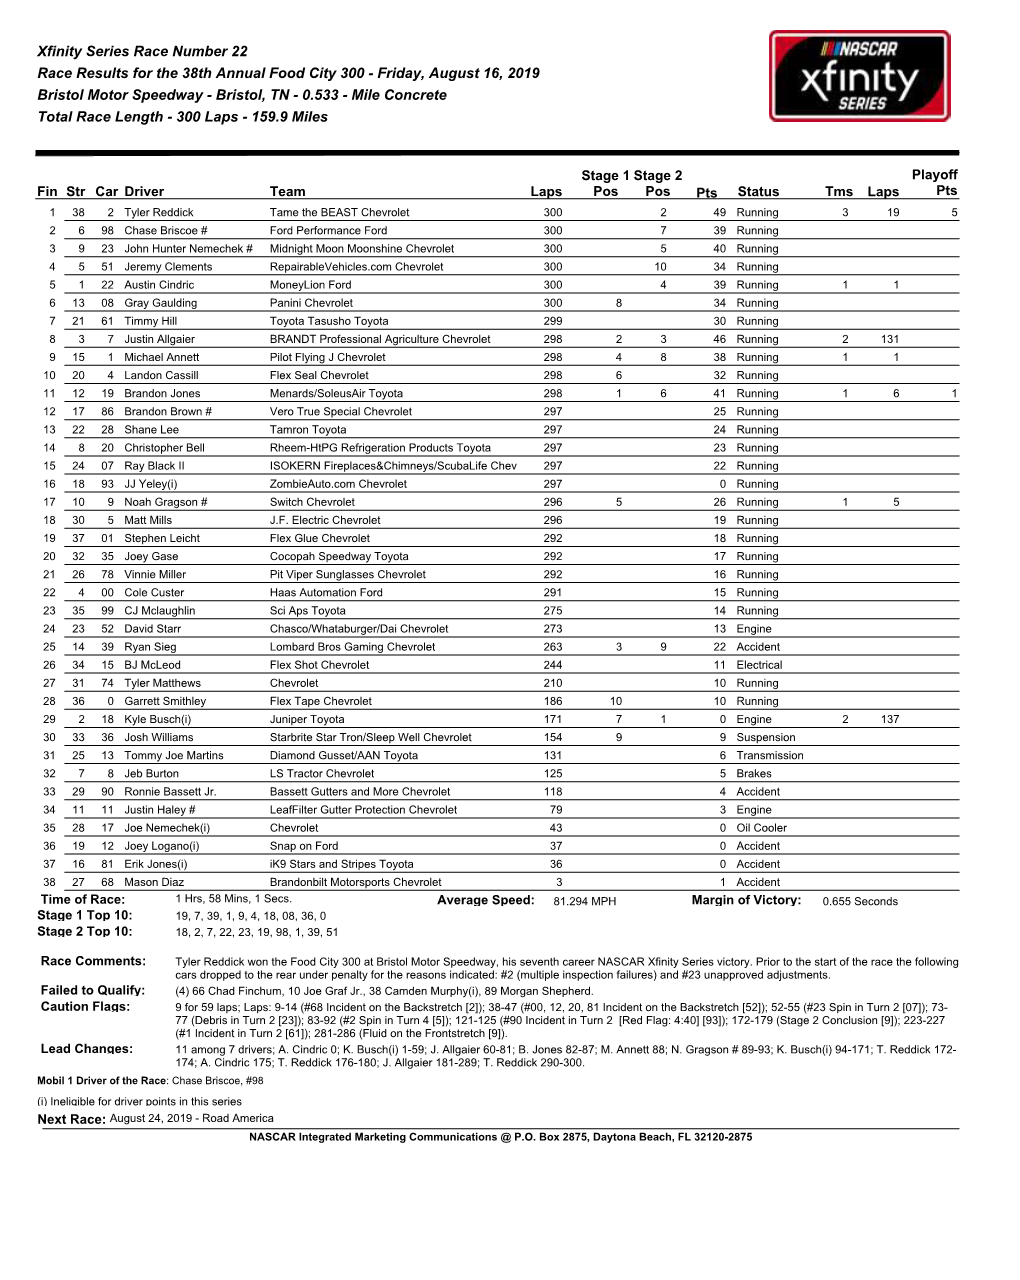 Xfinity Series Race Number 22 Race Results for the 38Th Annual Food